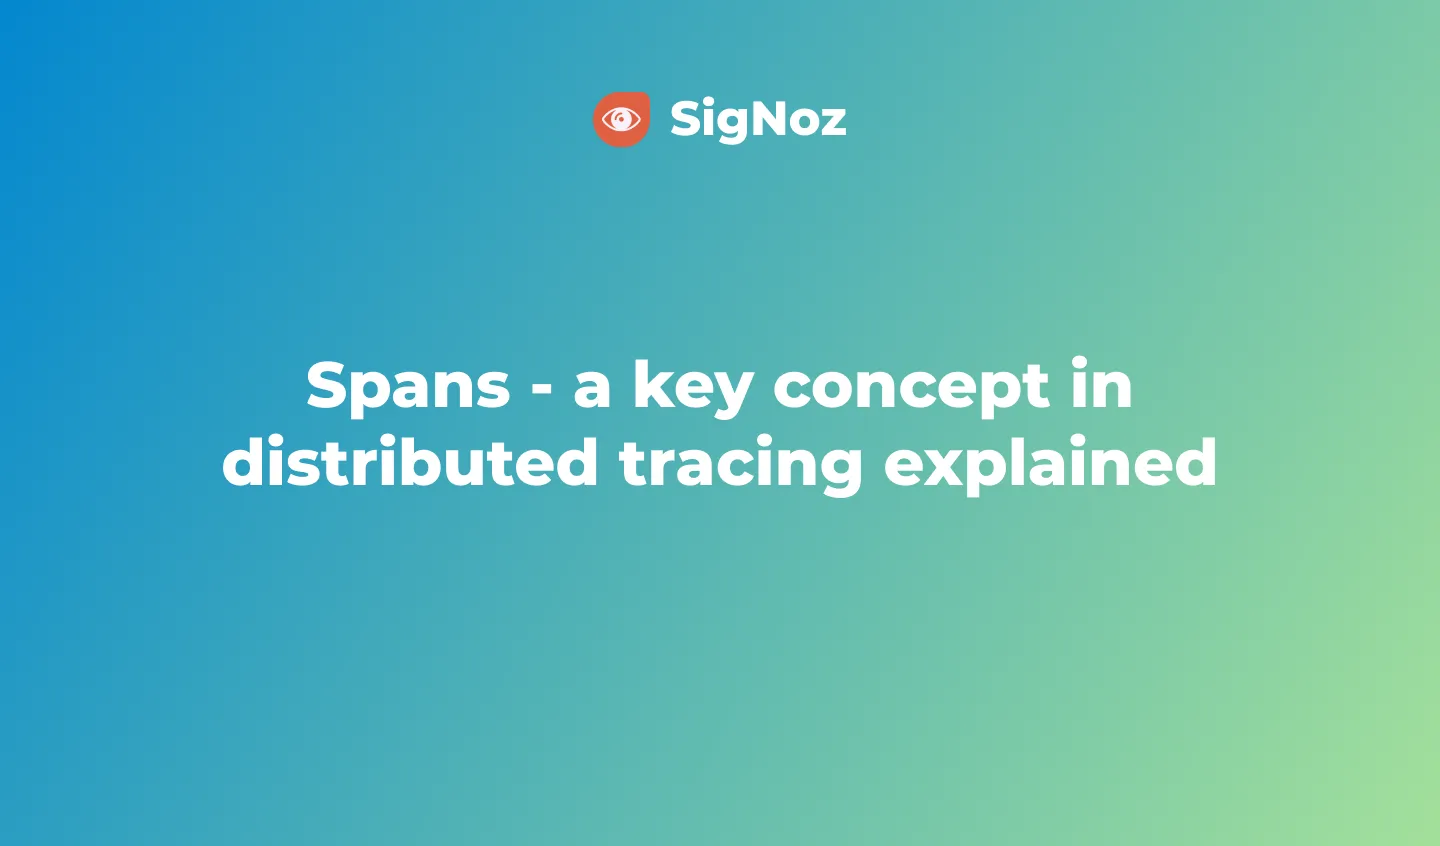 Spans are fundamental building blocks of distributed tracing. A single trace in distributed tracing consists of a series of tagged time intervals know